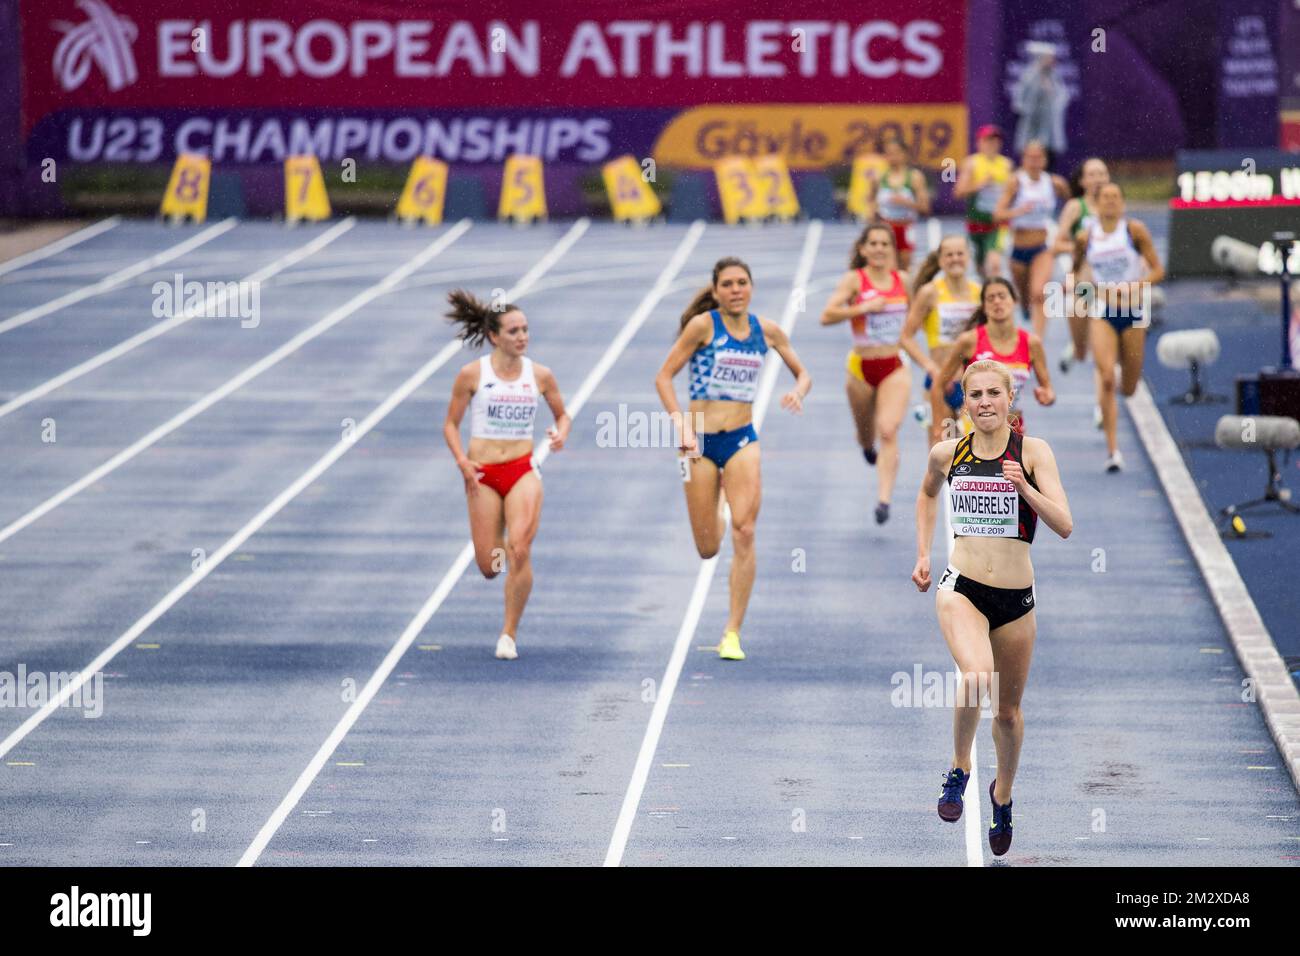 Belgian Elise Vanderelst (R) pictured in action during the 1500m race on the second day of the European Athletics U23 Championships, Friday 12 July 2019 in Gavle, Sweden. BELGA PHOTO JASPER JACOBS Stock Photo